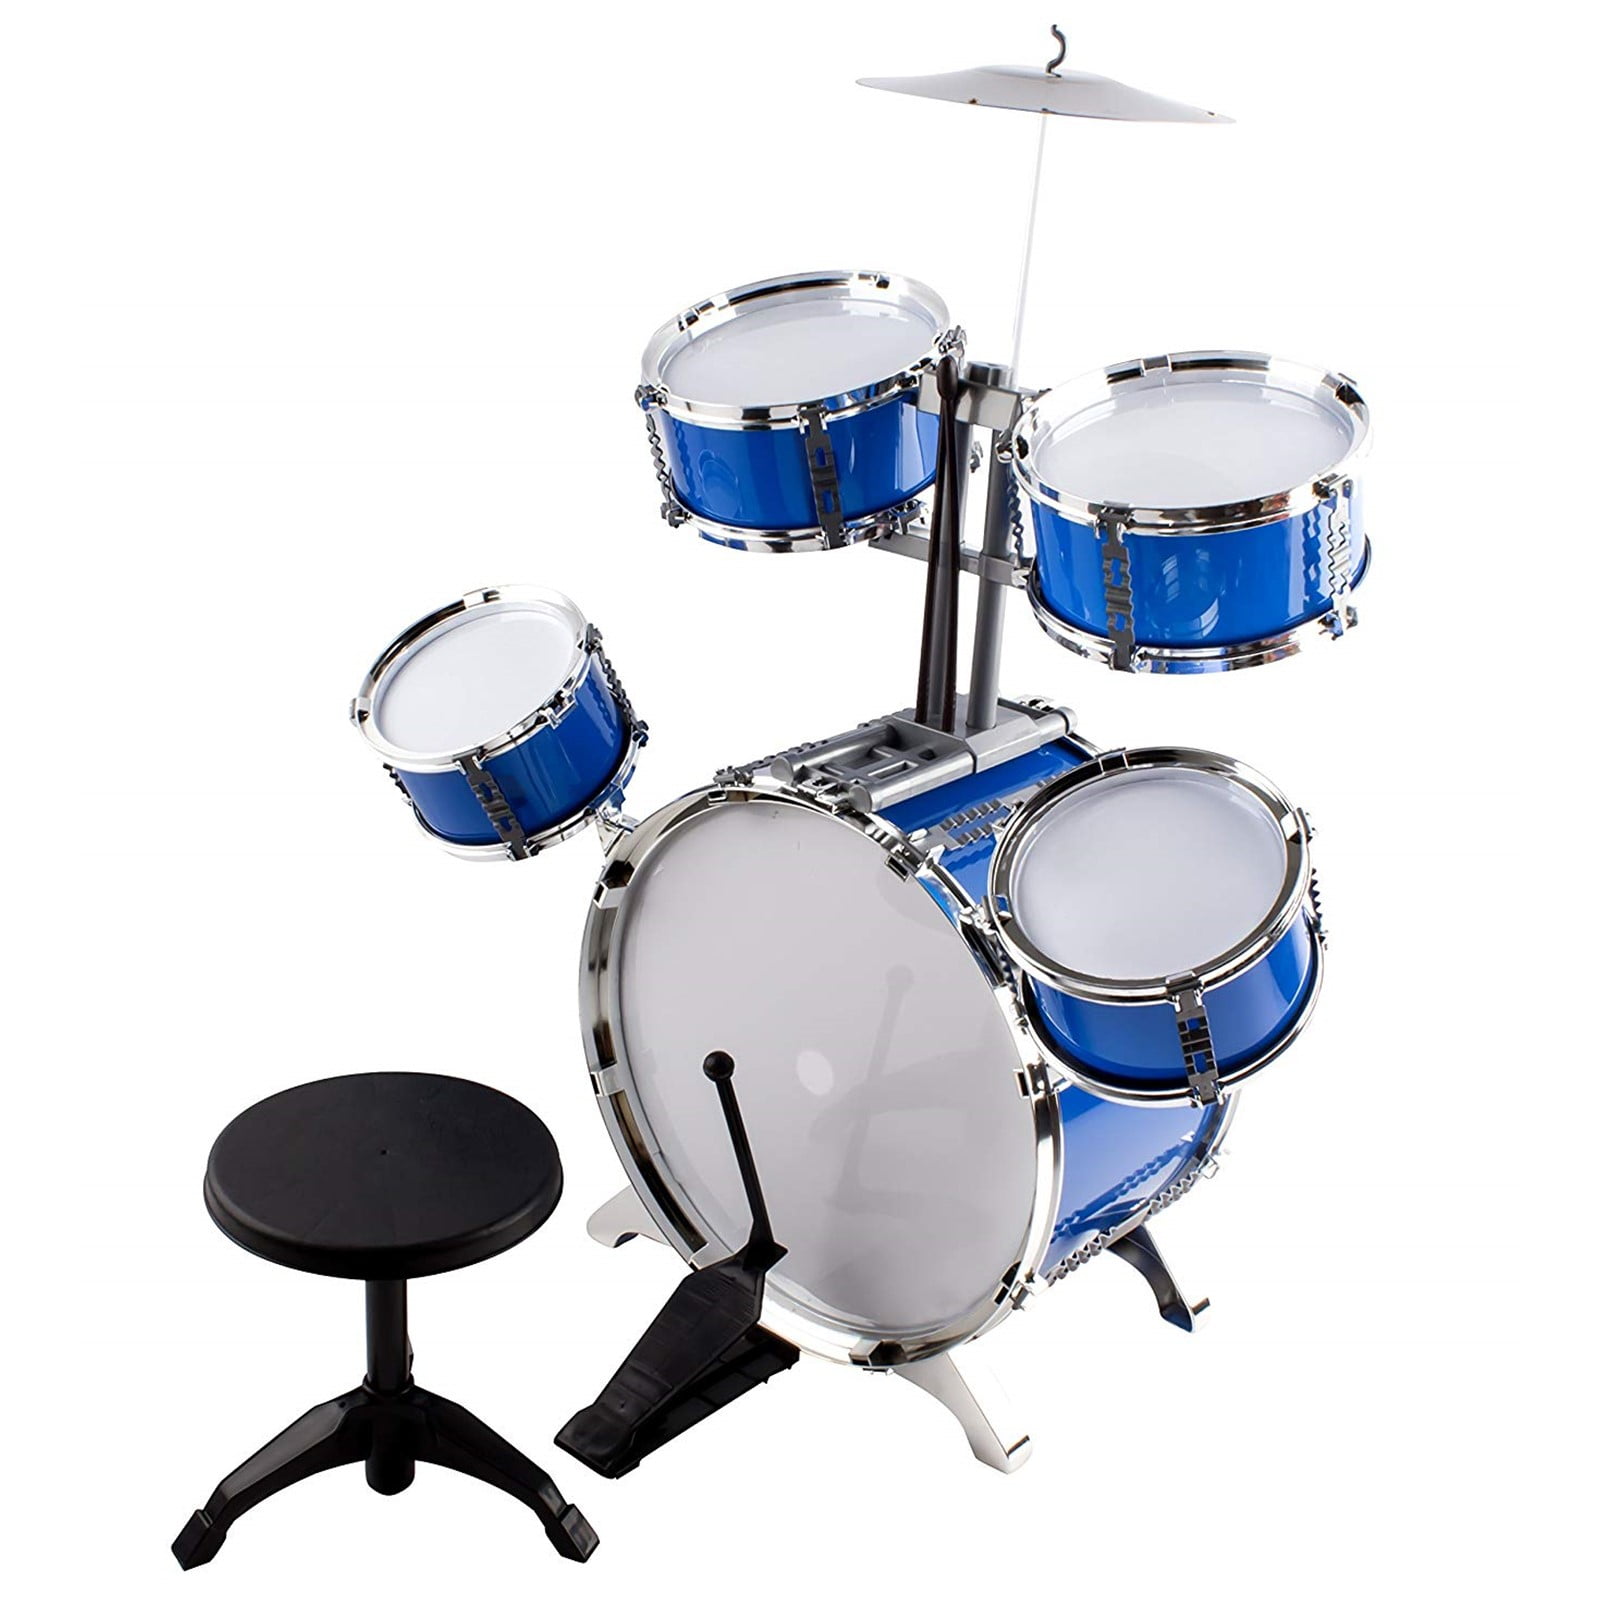 Classic Rhythm Toy Jazz Drum Set 6 Piece Kids Musical Instrument Playset With 5 Drums, Cymbal, Chair, Bass, Kick Pedal And Drumsticks A Perfect Beginner Gift For Toddlers And Small Children (Blue) -